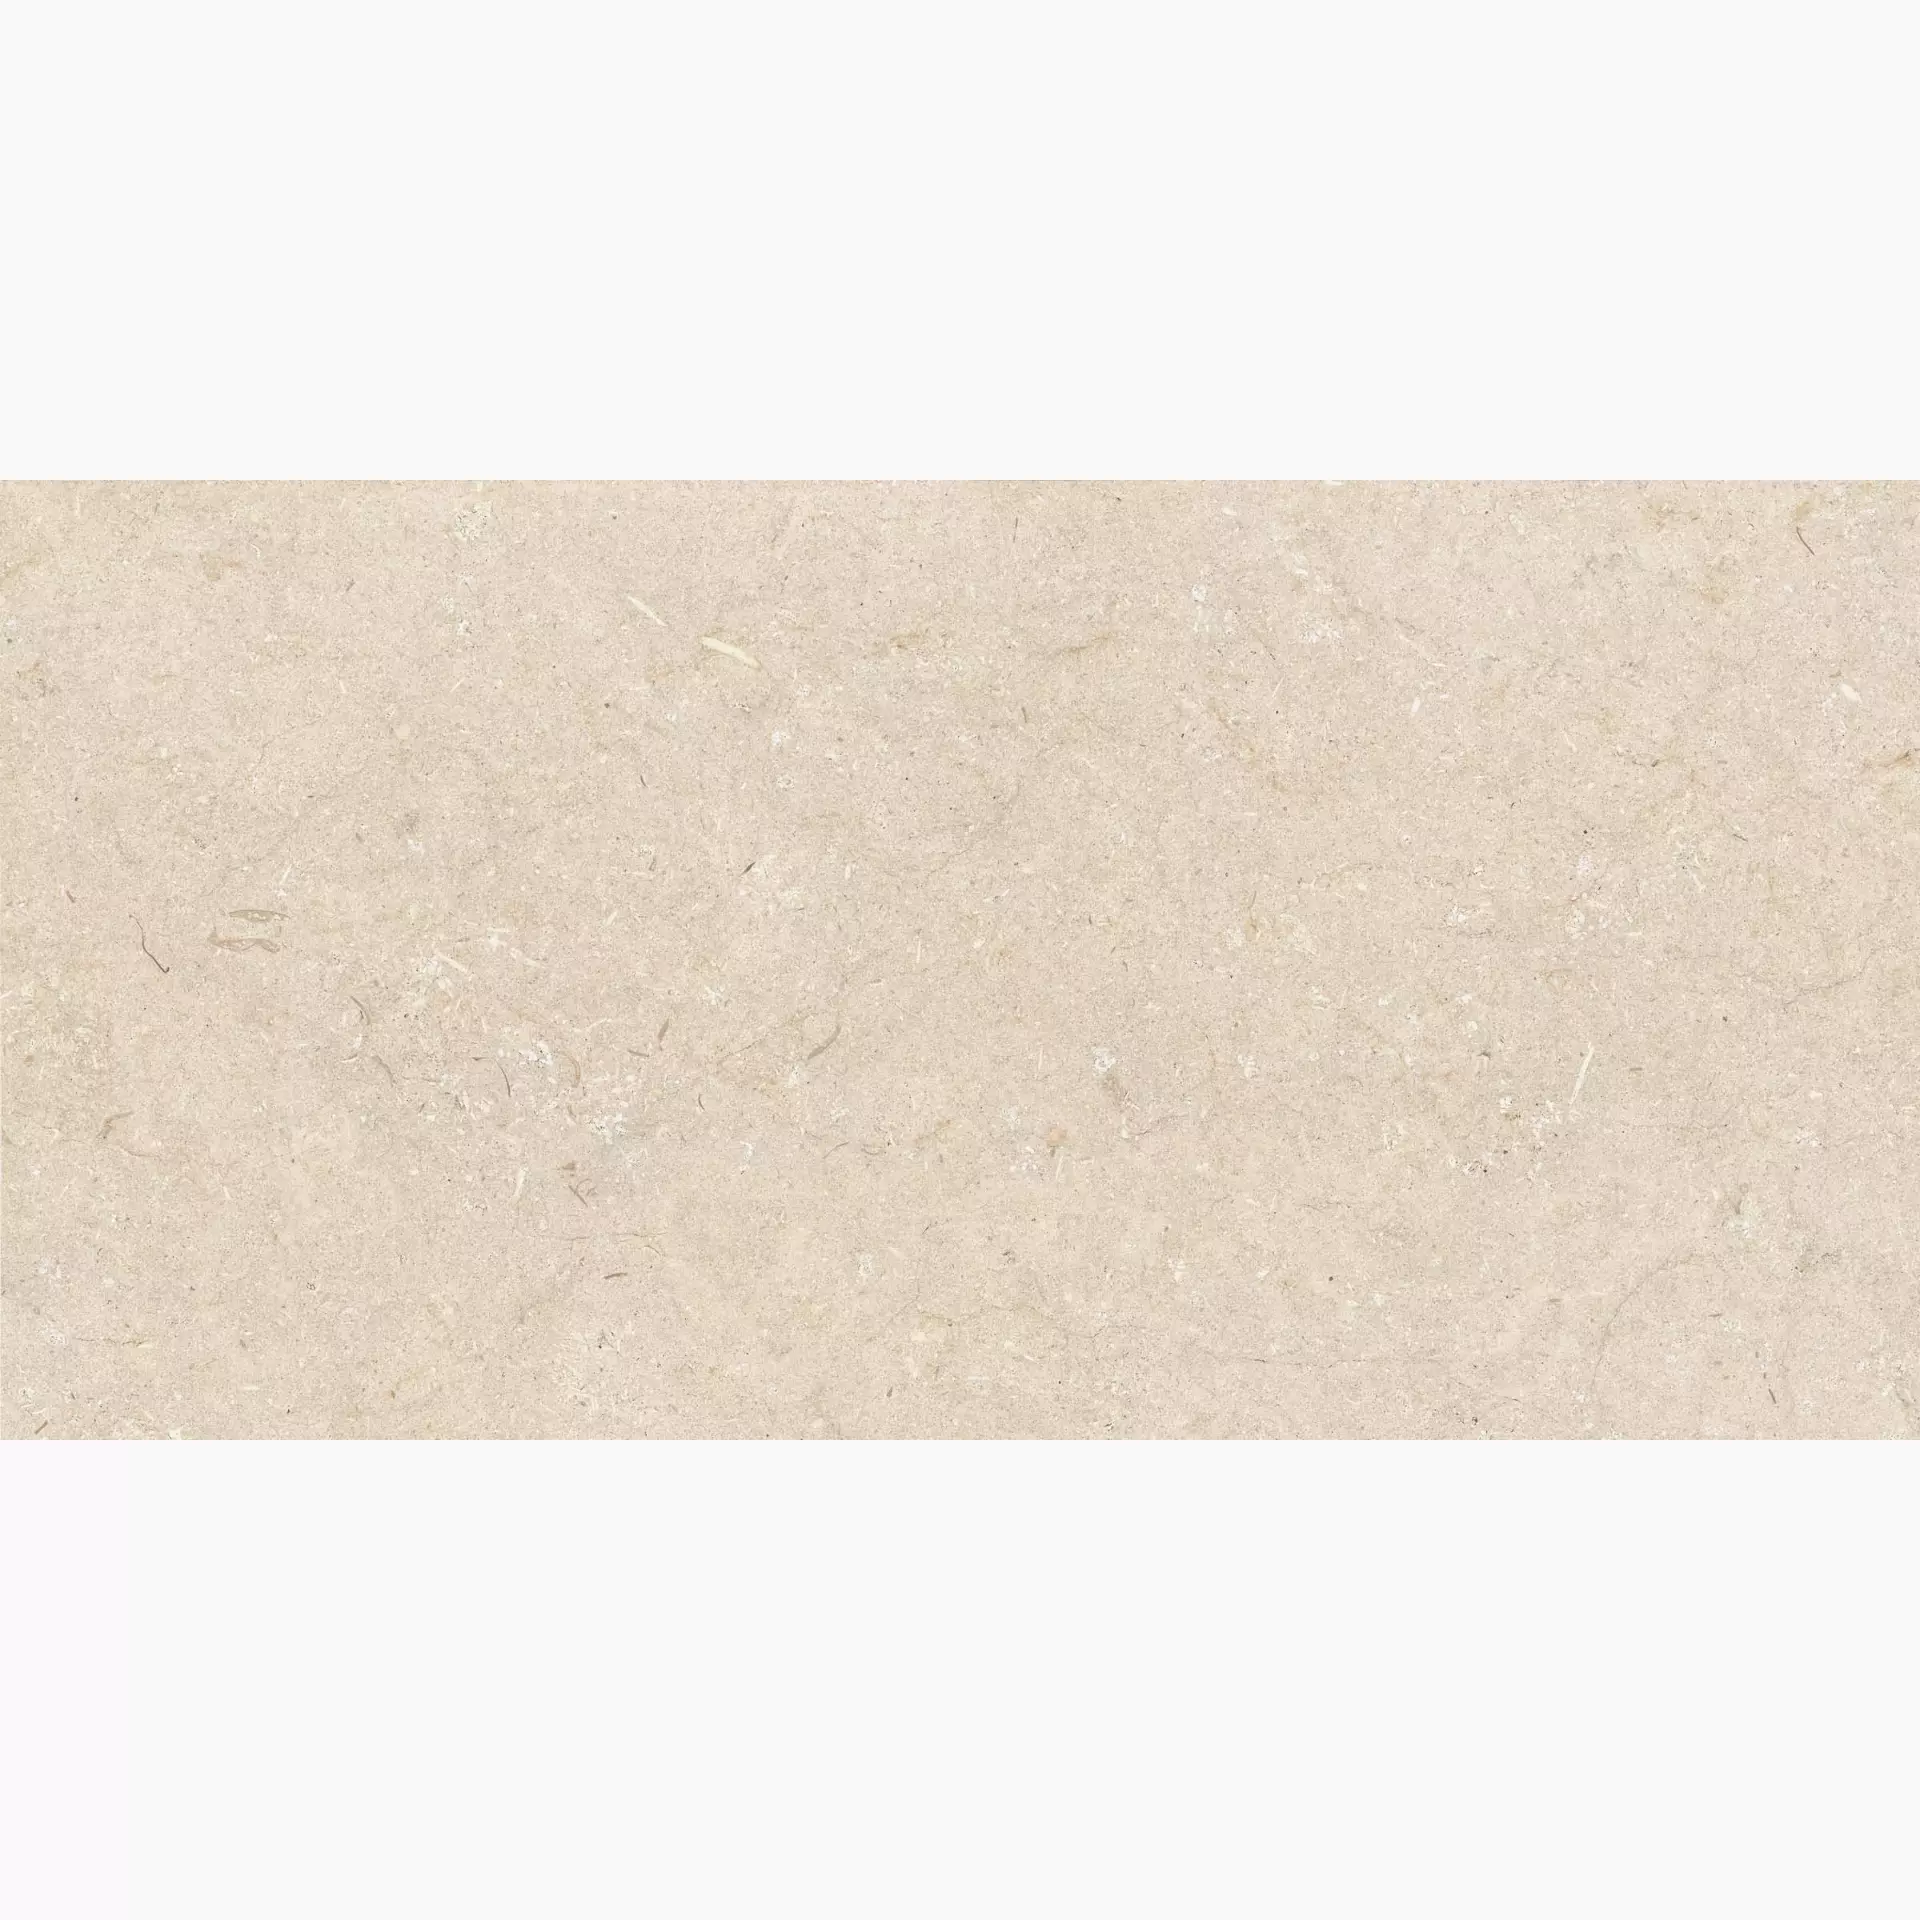 ABK Poetry Stone Trani Beige Naturale PF60010538 60x120cm rectified 8,5mm